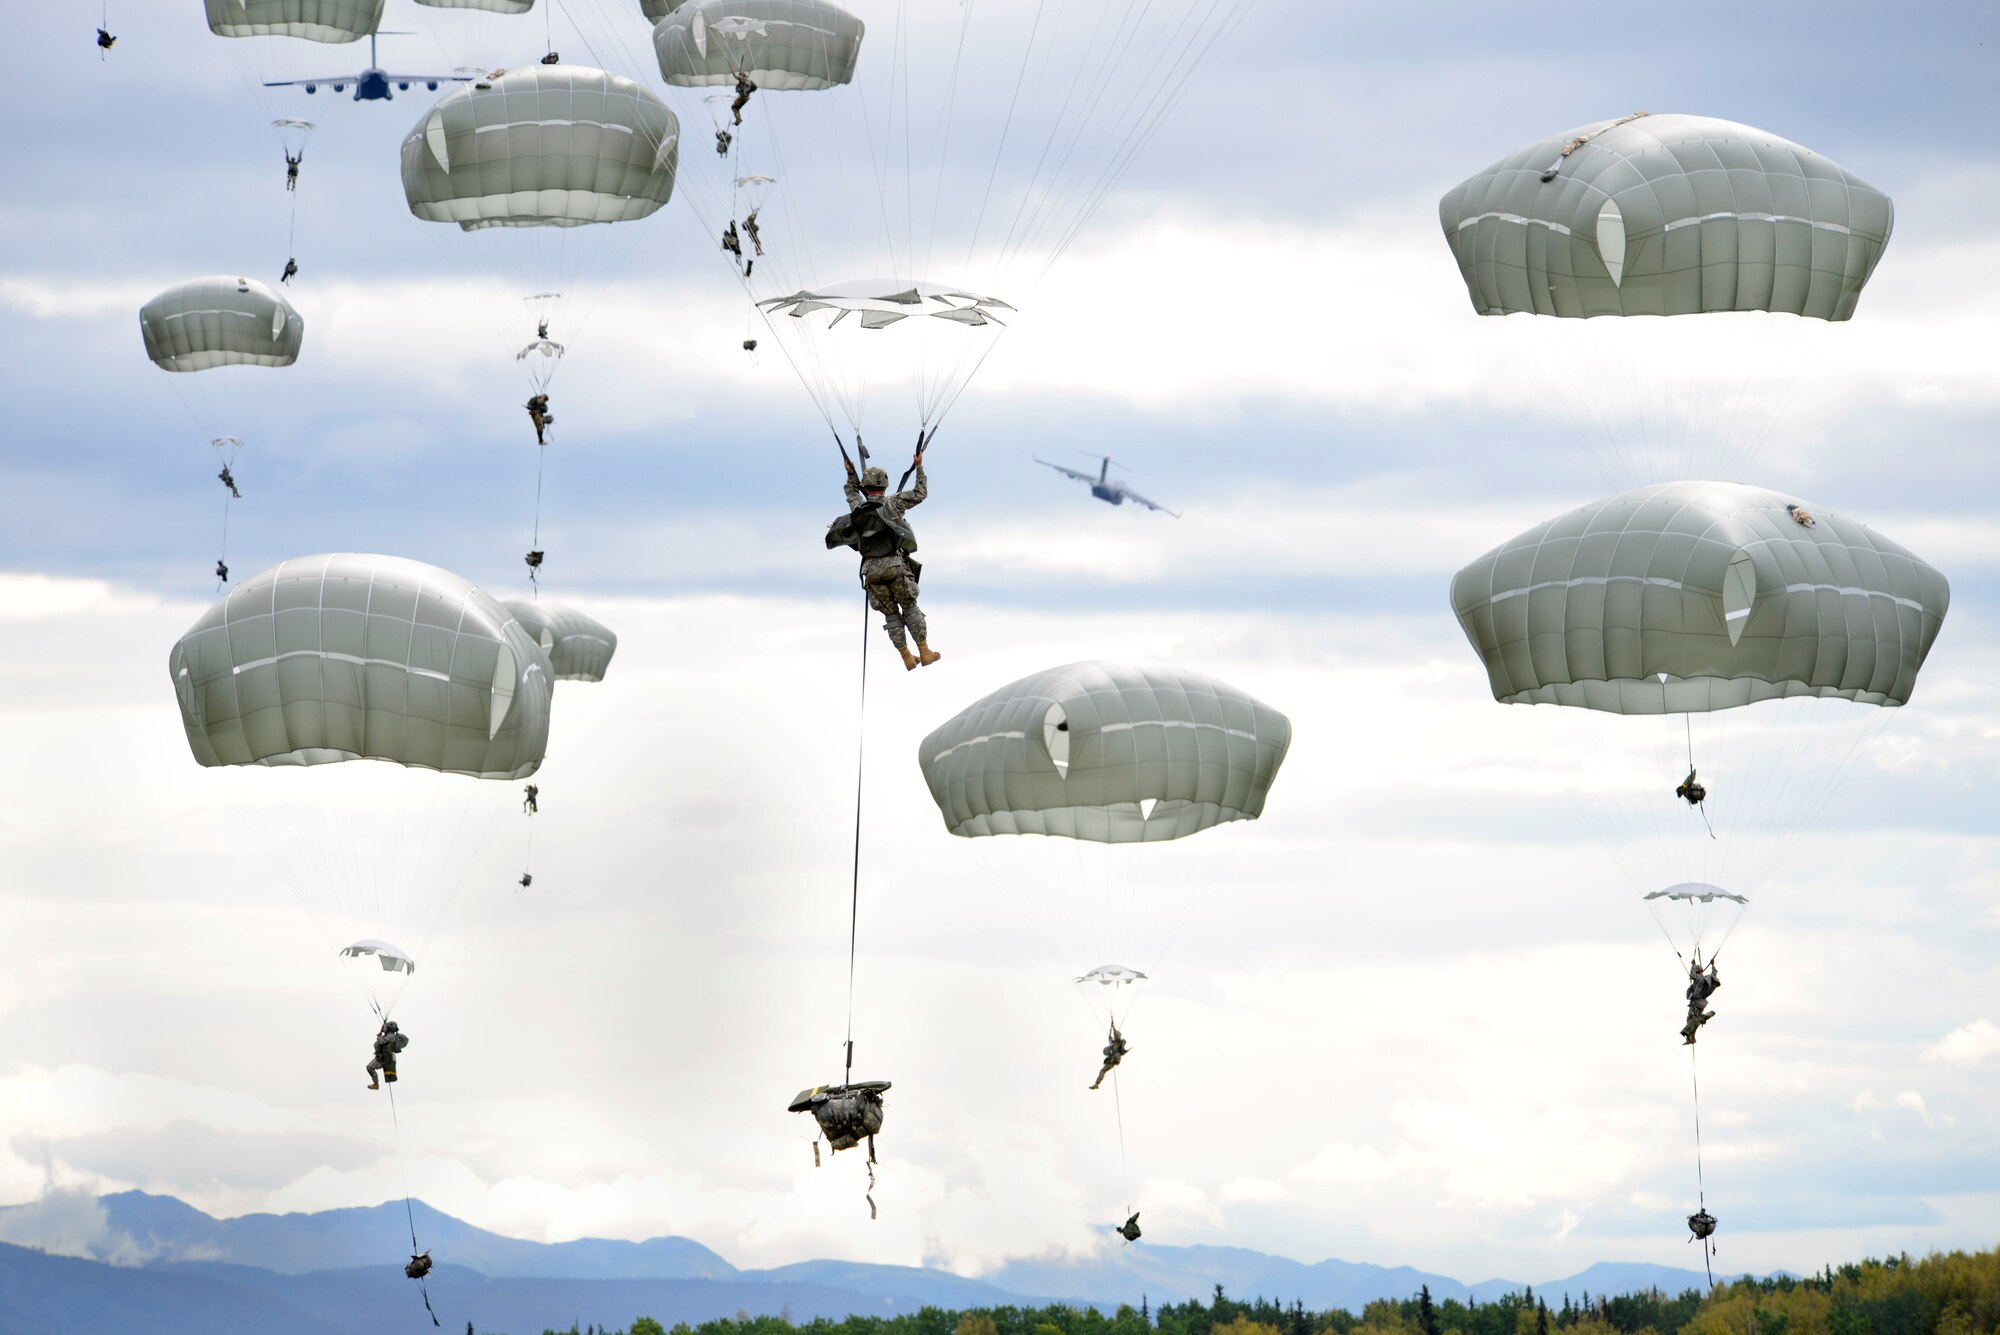 Paratroopers assigned to the 4th Infantry Brigade Combat Team (Airborne), 25th Infantry Division, U.S. Army Alaska, jump from a C-17 Globemaster III during a joint forcible entry exercise at Malemute Drop Zone on Joint Base Elmendorf-Richardson, Alaska, Aug. 23, 2016, as part of Exercise Spartan Agoge. Spartan Agoge is a brigade-level field training exercise that began Aug. 15, and focuses on an array of combat-related tasks from squad live-fire exercises to helicopter air insertion and airborne assault training. (U.S. Air Force photo by Airman 1st Class Valerie Monroy)